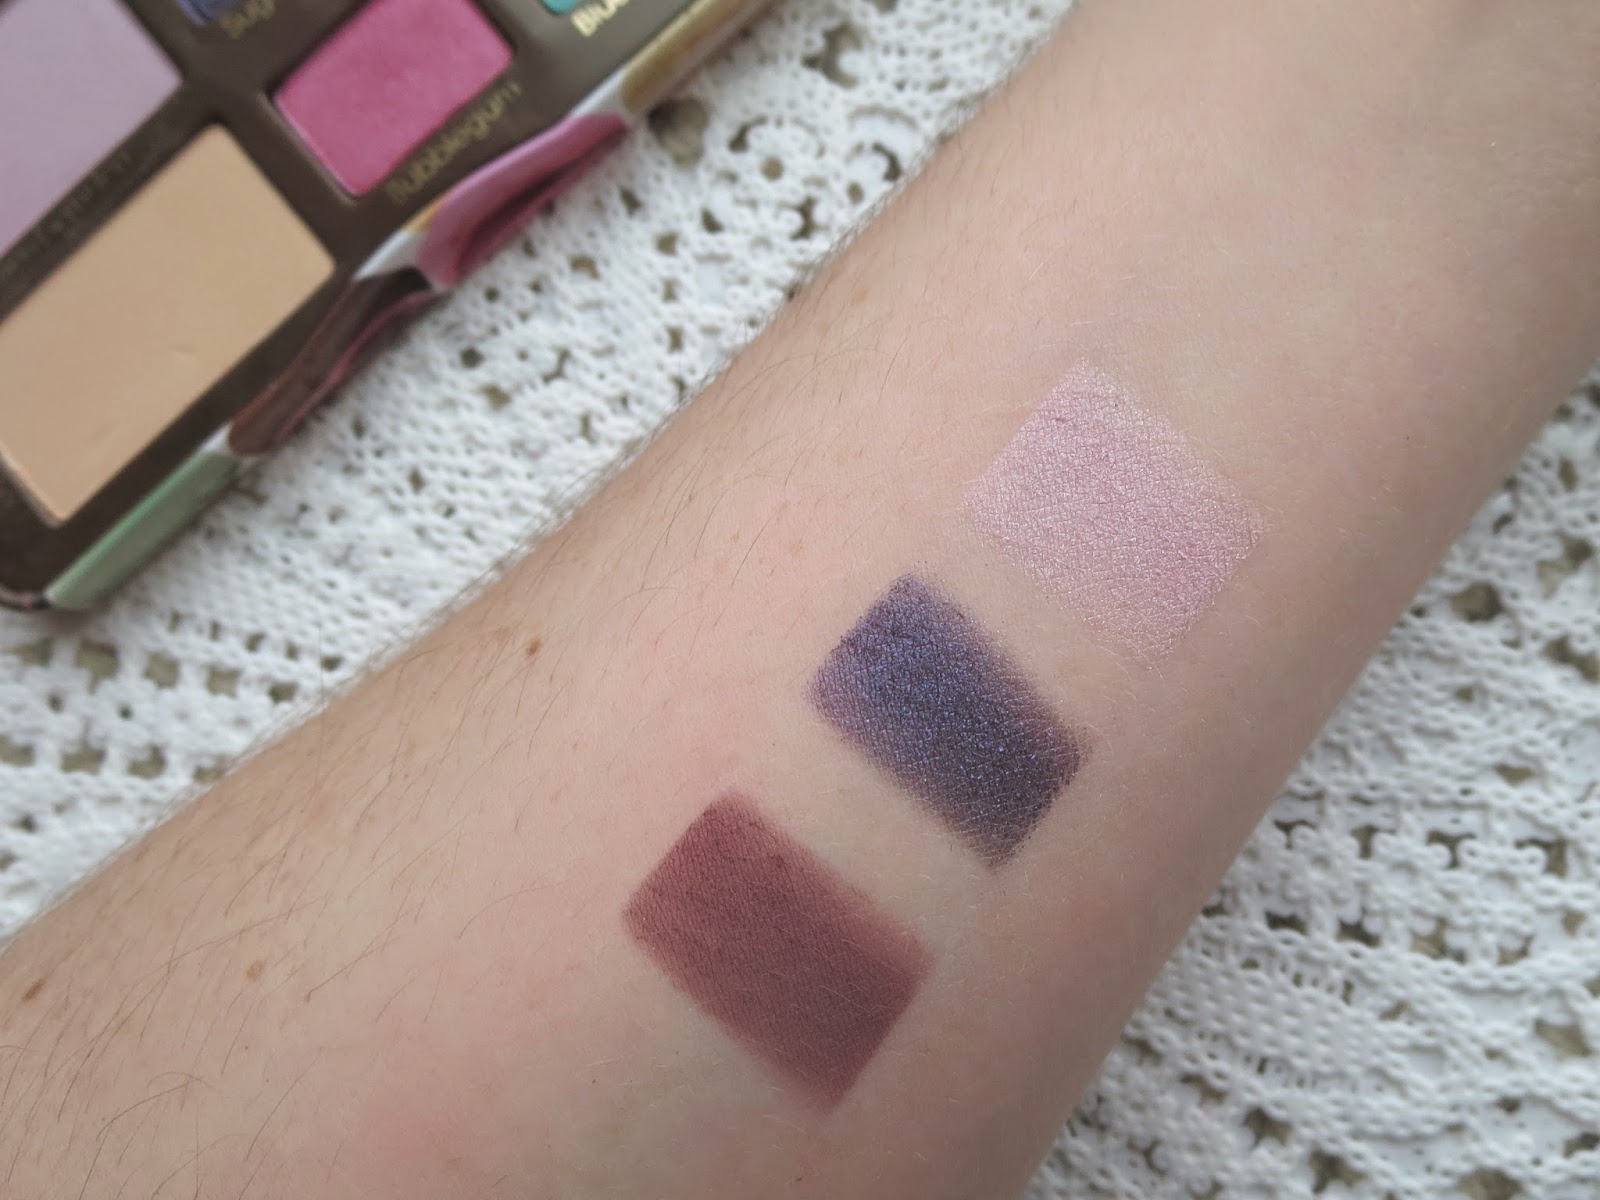 a picture of Too Faced Sugar Pop palette swatch (Strawberry Ice, Sugared Violet, Blackberry)